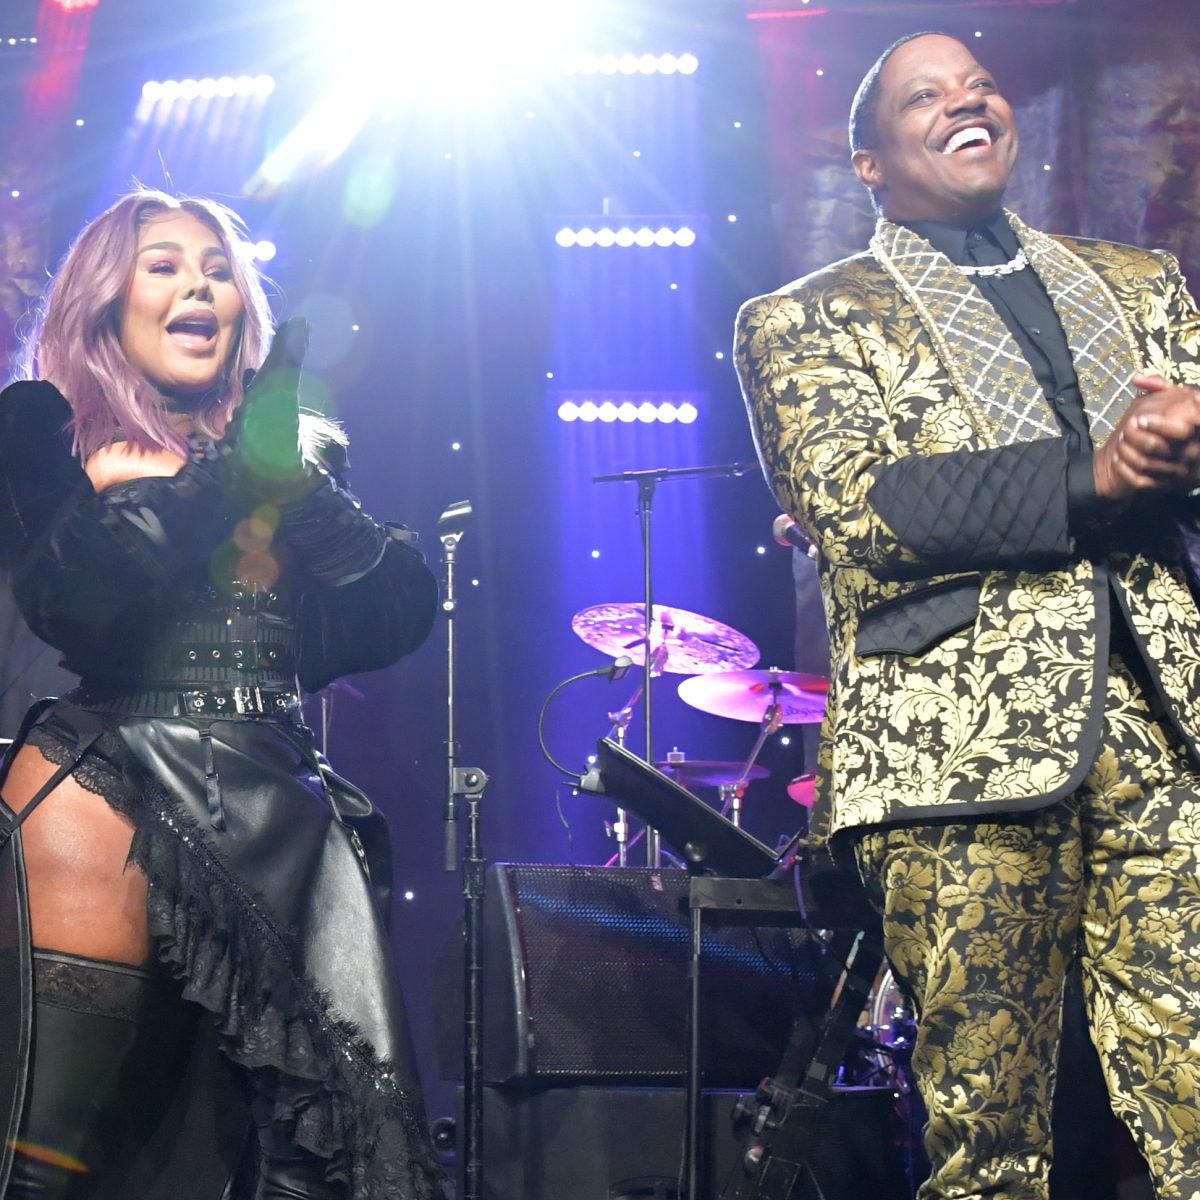 Lil Kim, Mase, Ja Rule And More To Hit The Stage With DJ Cassidy for Live 'Pass The Mic' Concert